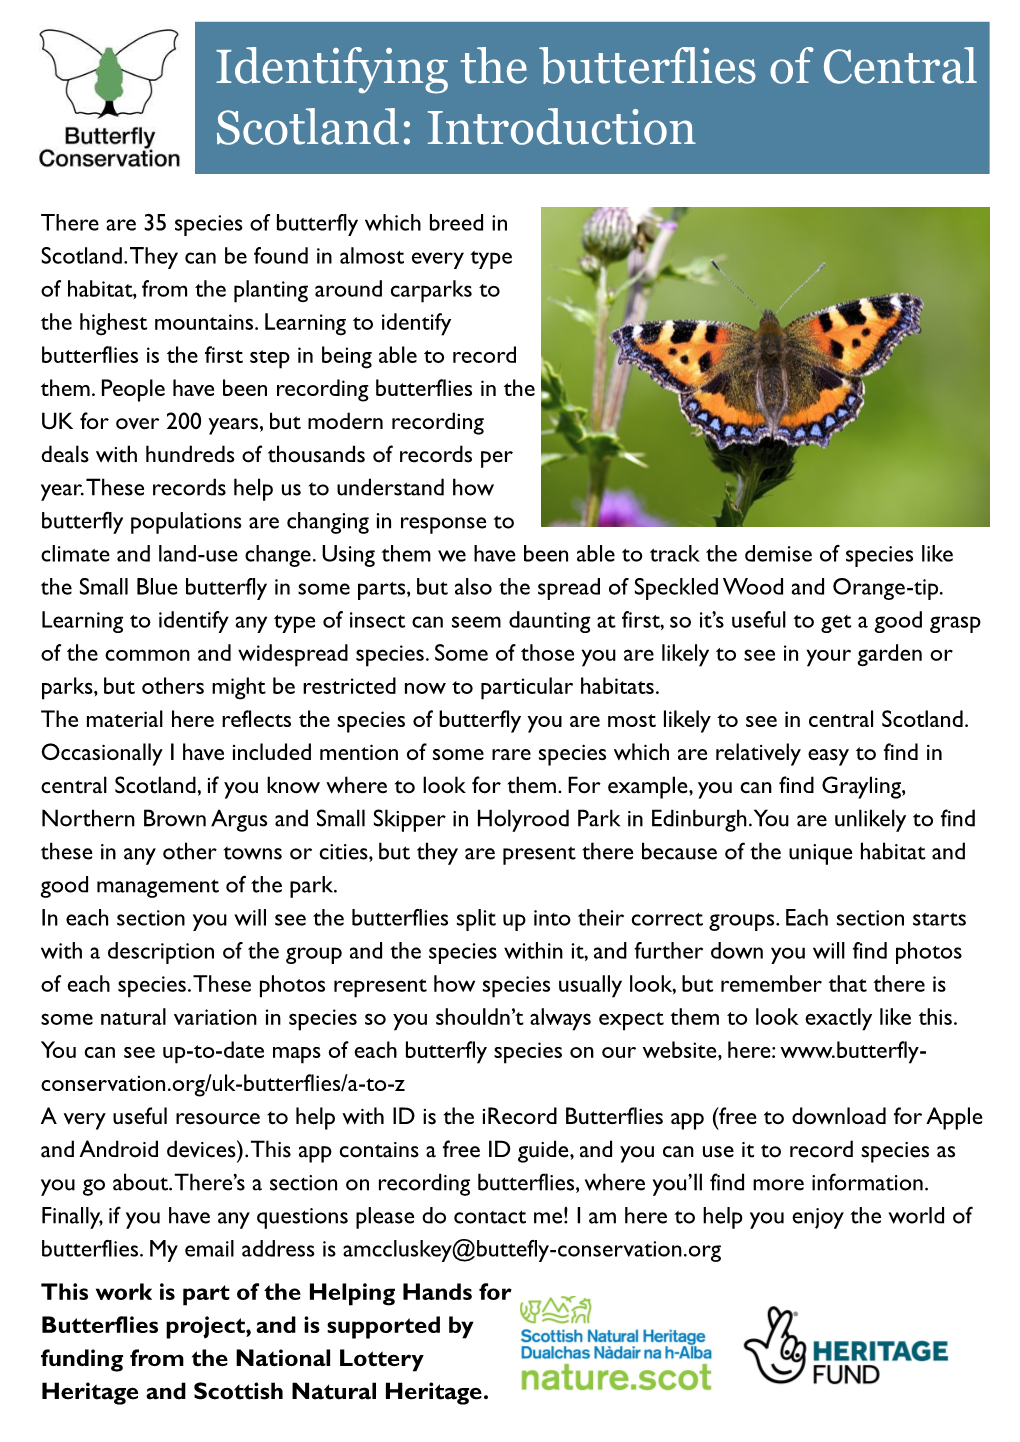 Butterfly Identification in Central Scotland